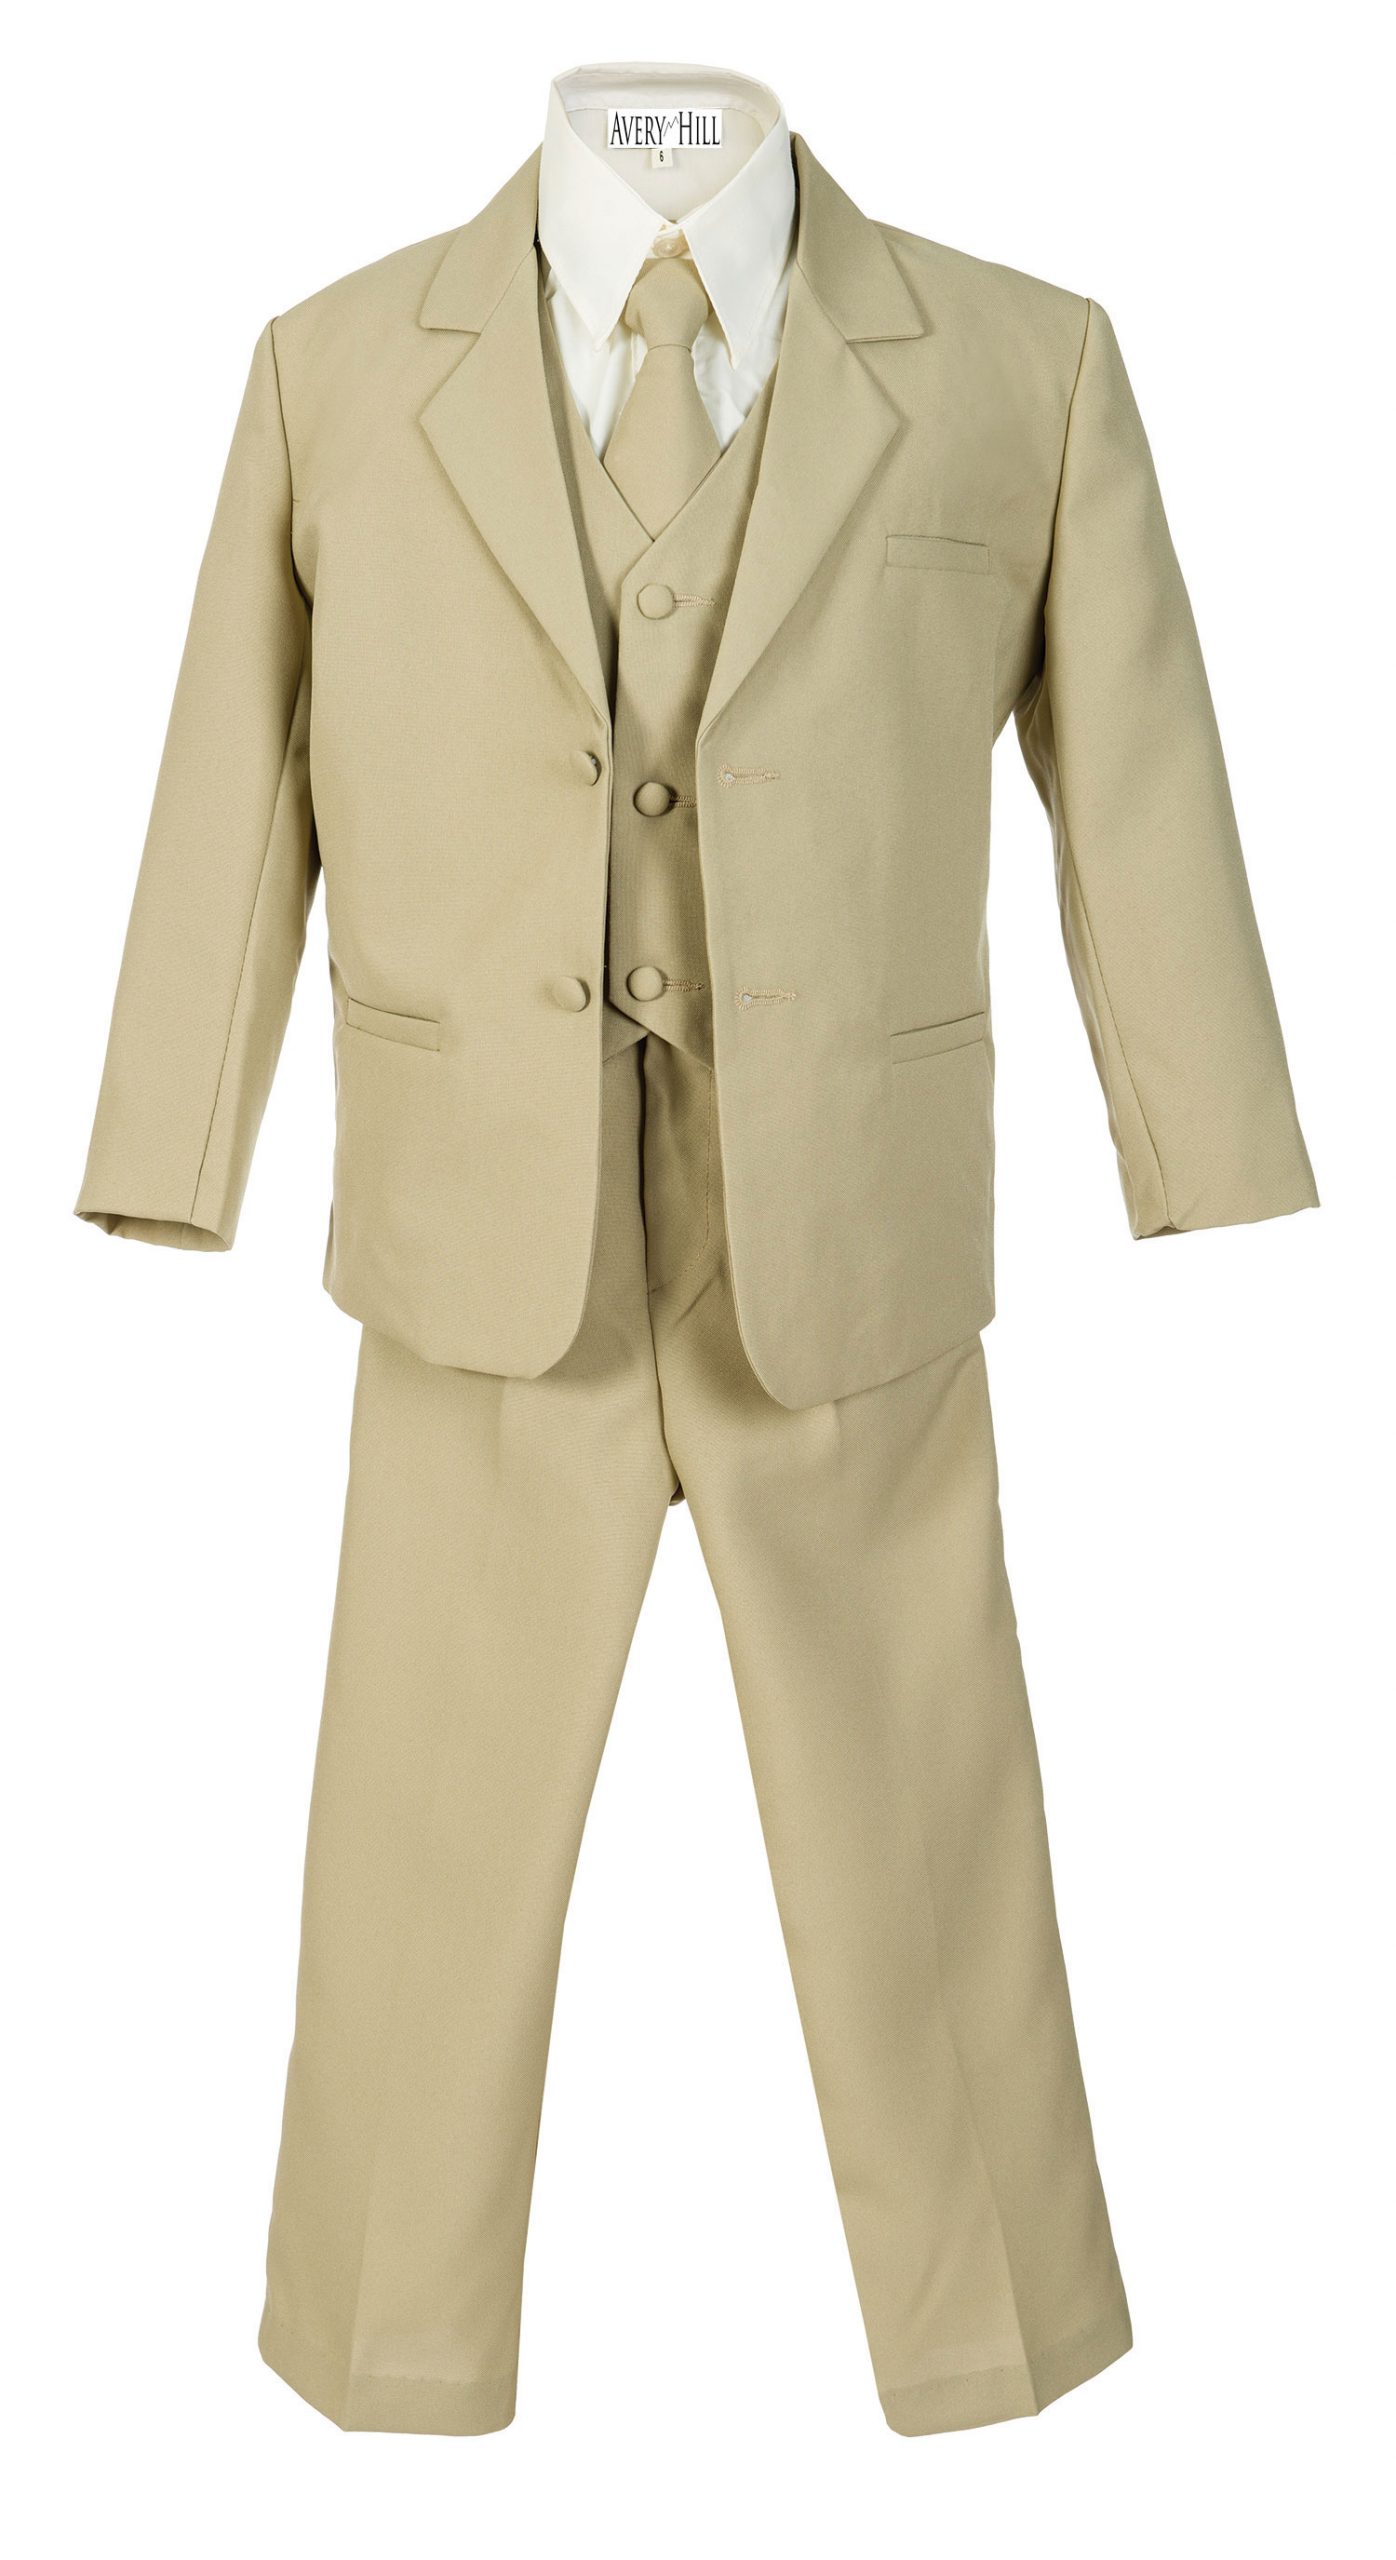 Avery Hill Boys Formal 5 Piece Suit with Shirt and Vest Khaki - S